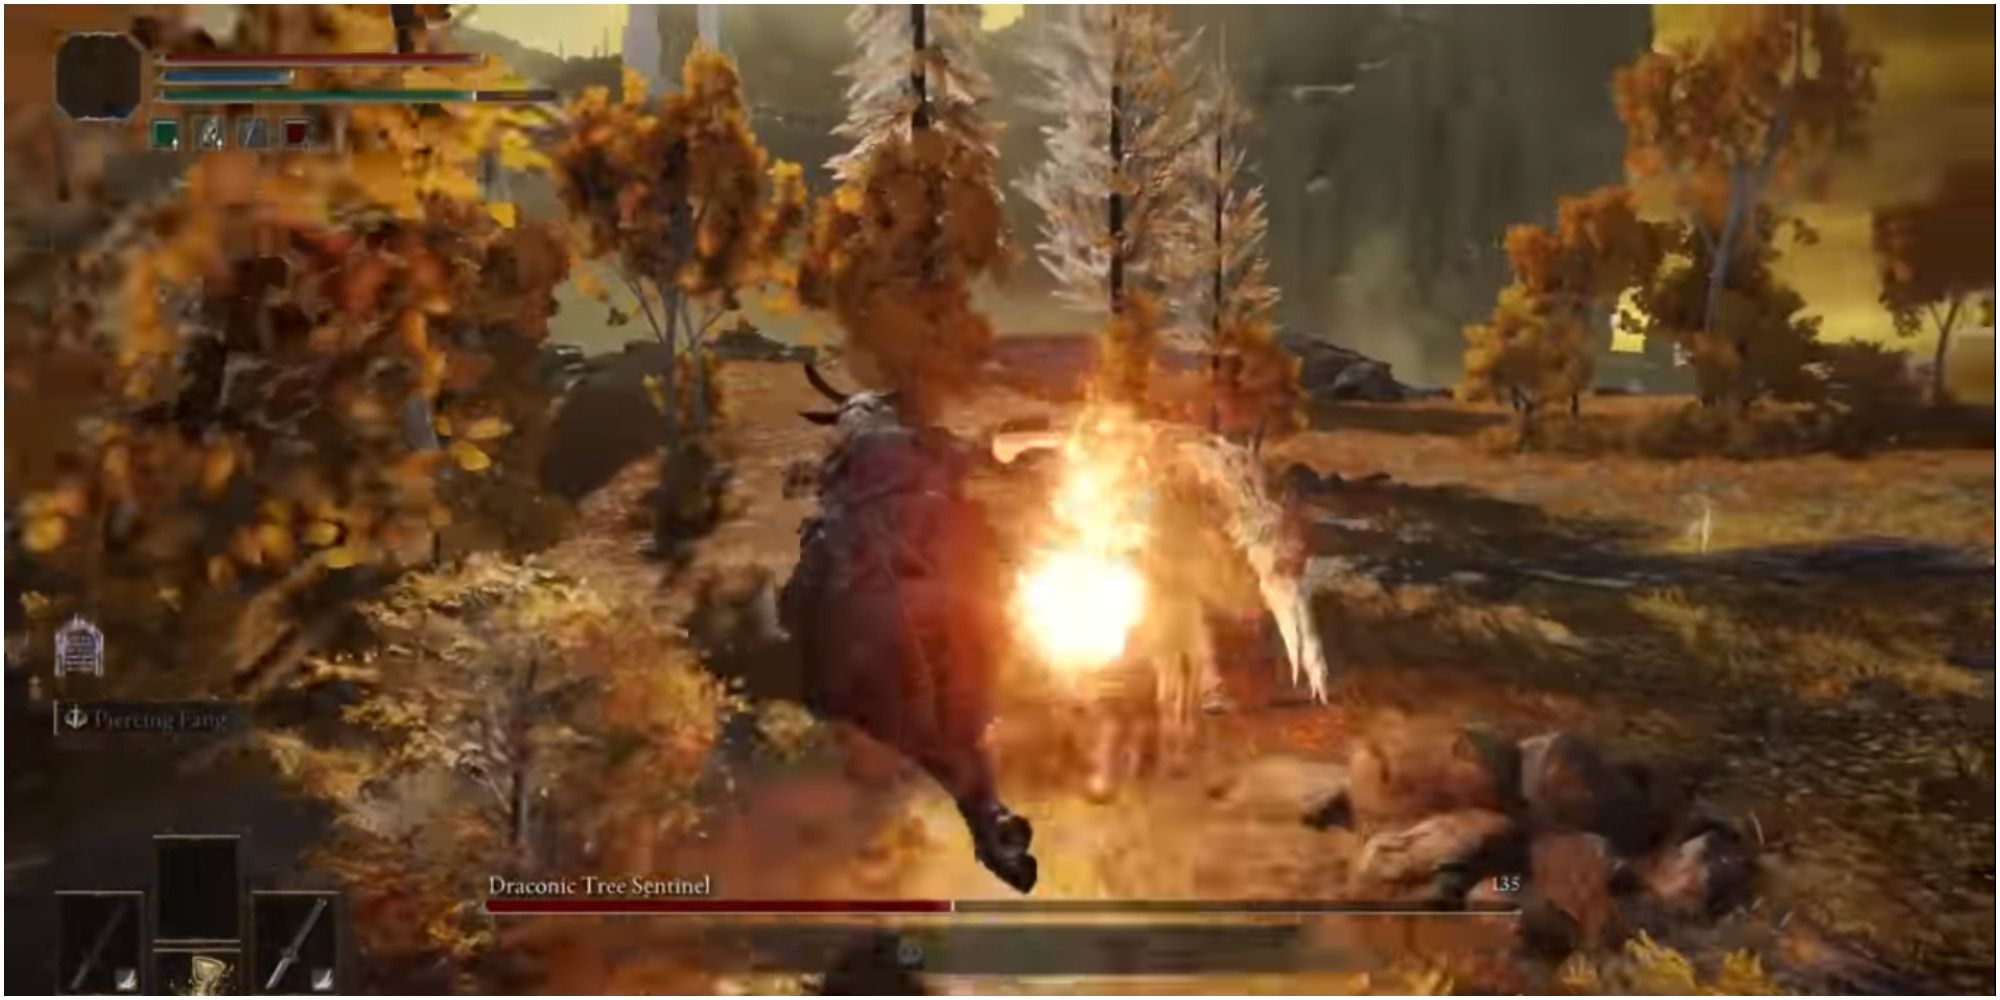 The boss's horse shooting a fireball at close range on the player.